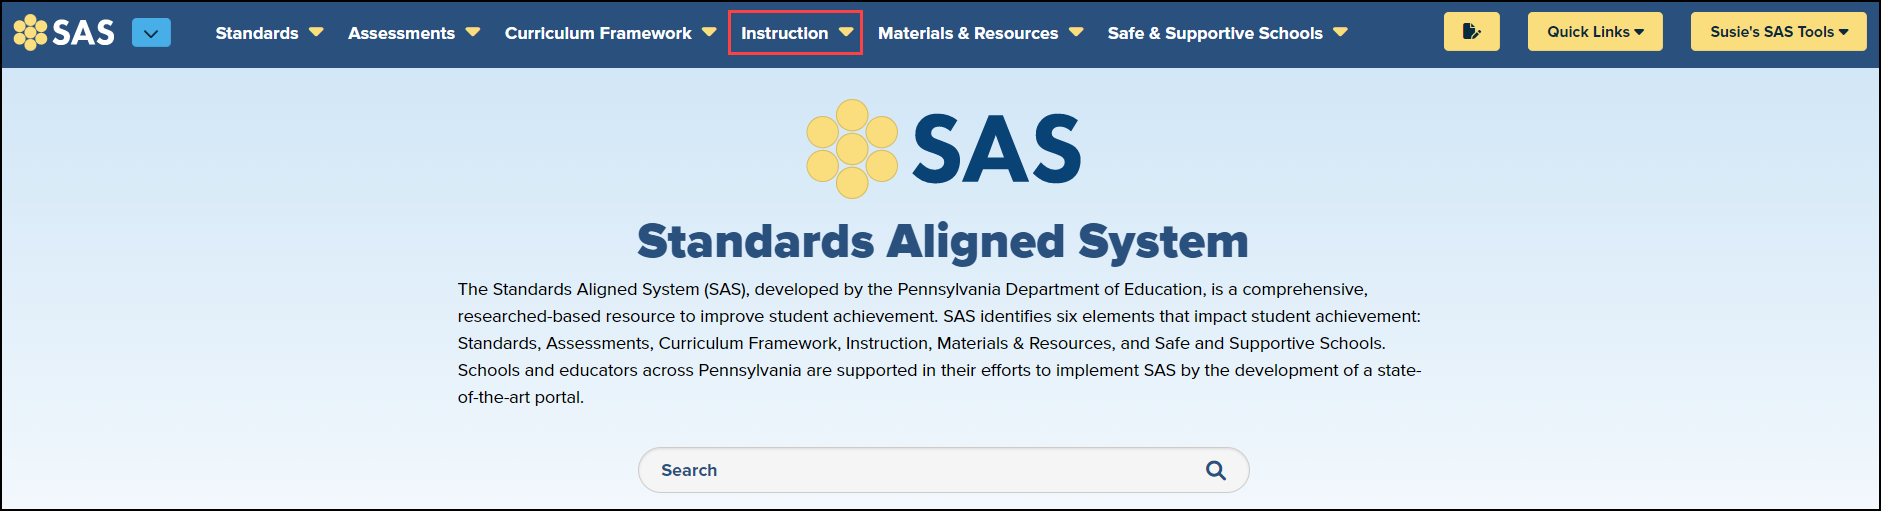 sas site header with instruction button highlighted